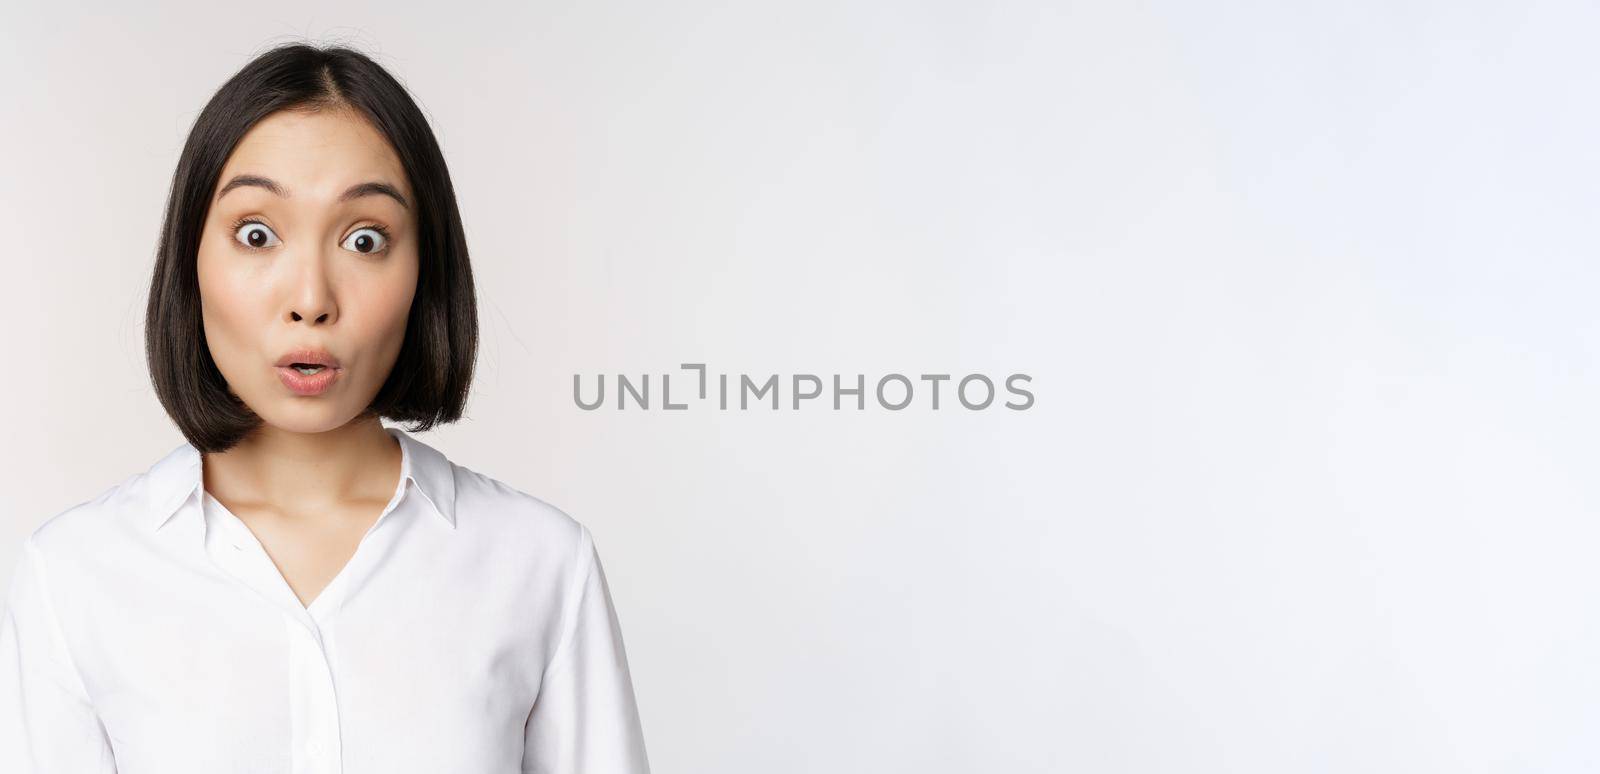 Close up portrait of young asian female model looking amazed at camera, smiling white teeth, standing against white background.